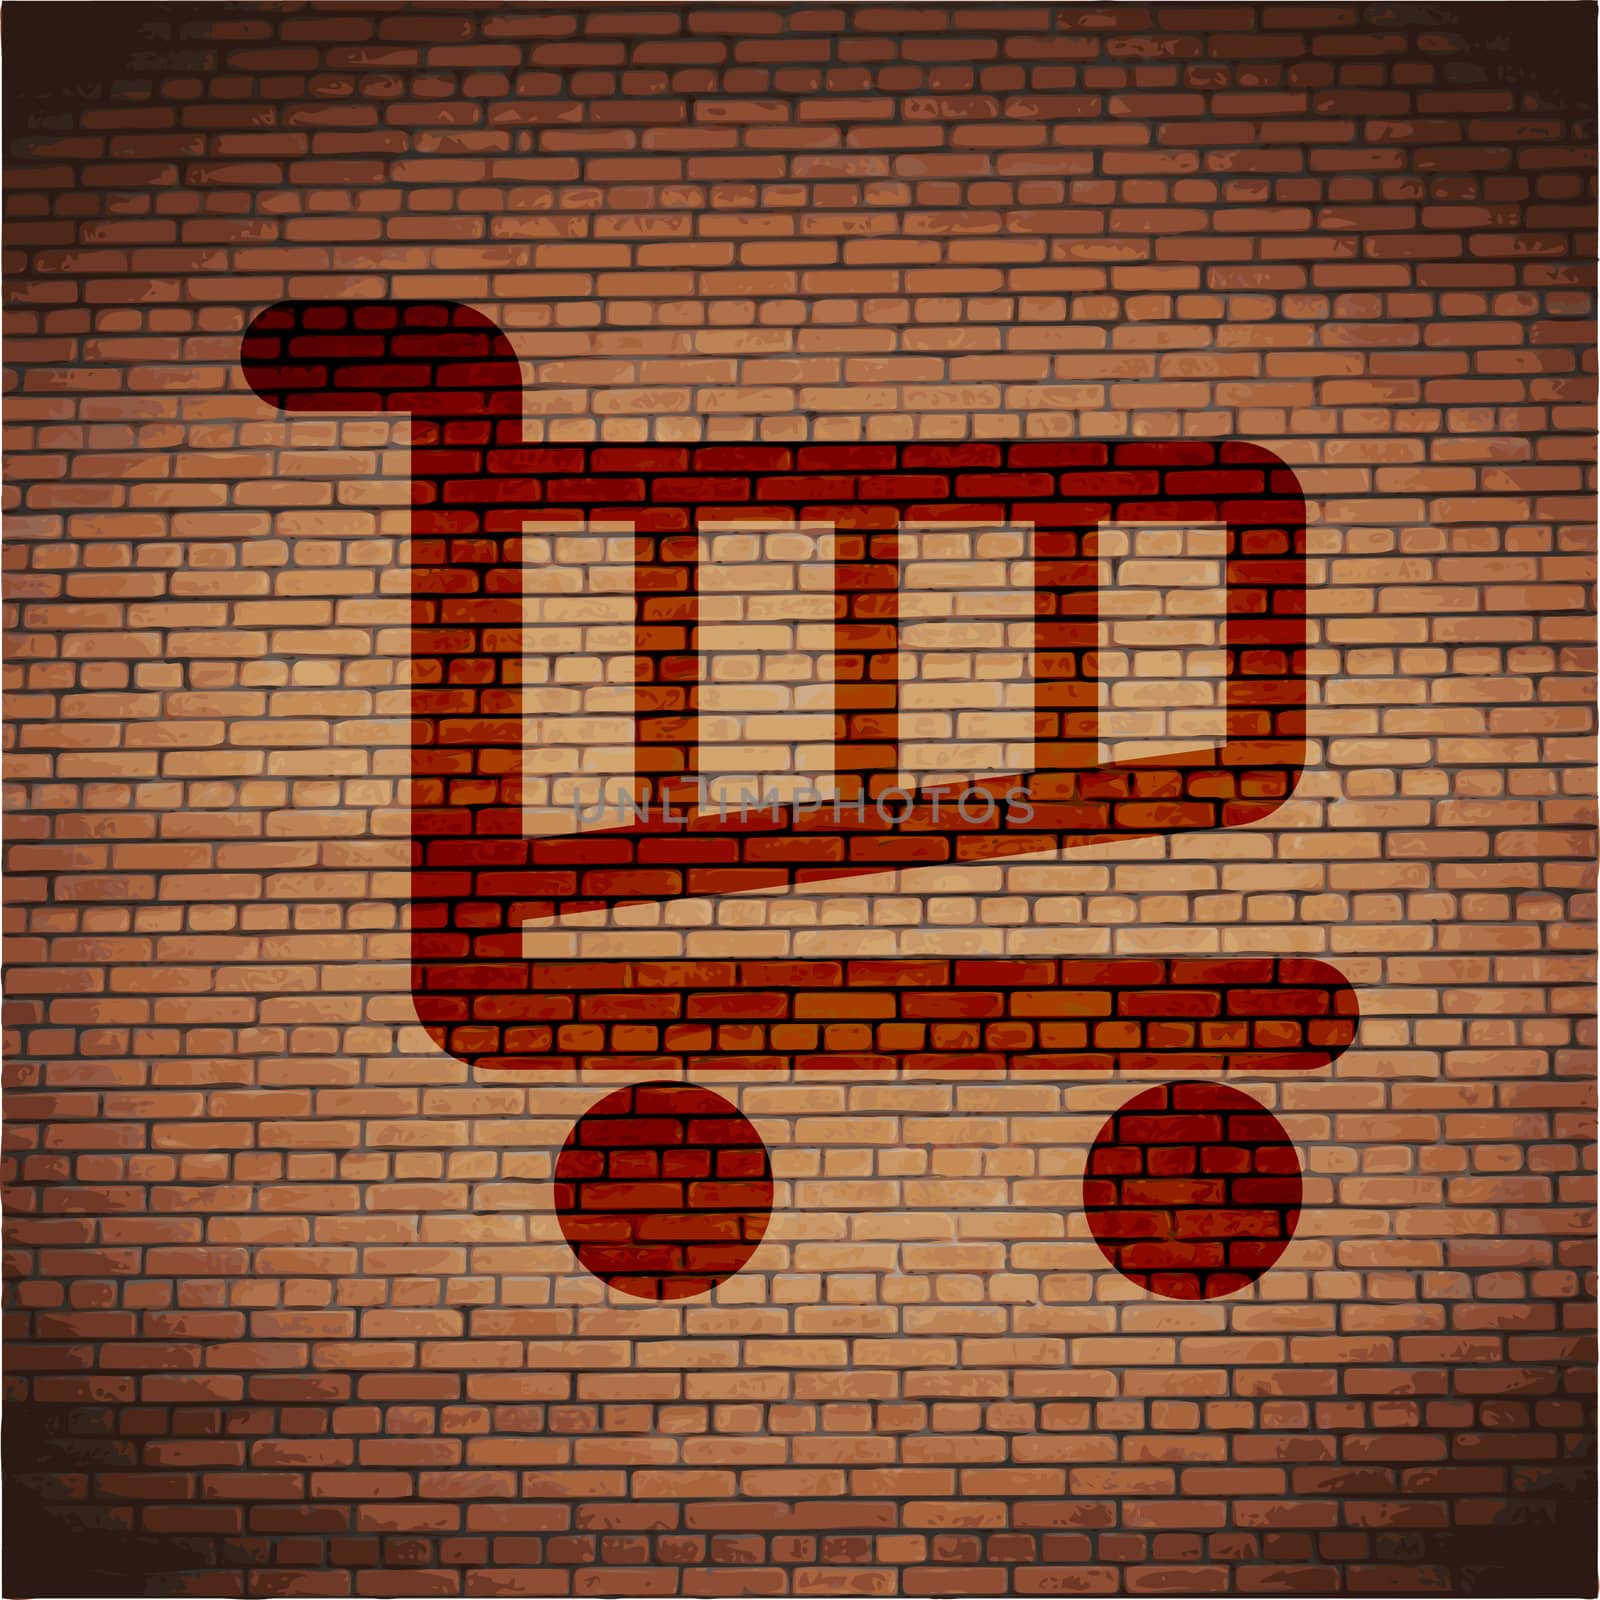 Shopping basket icon Flat with abstract background.